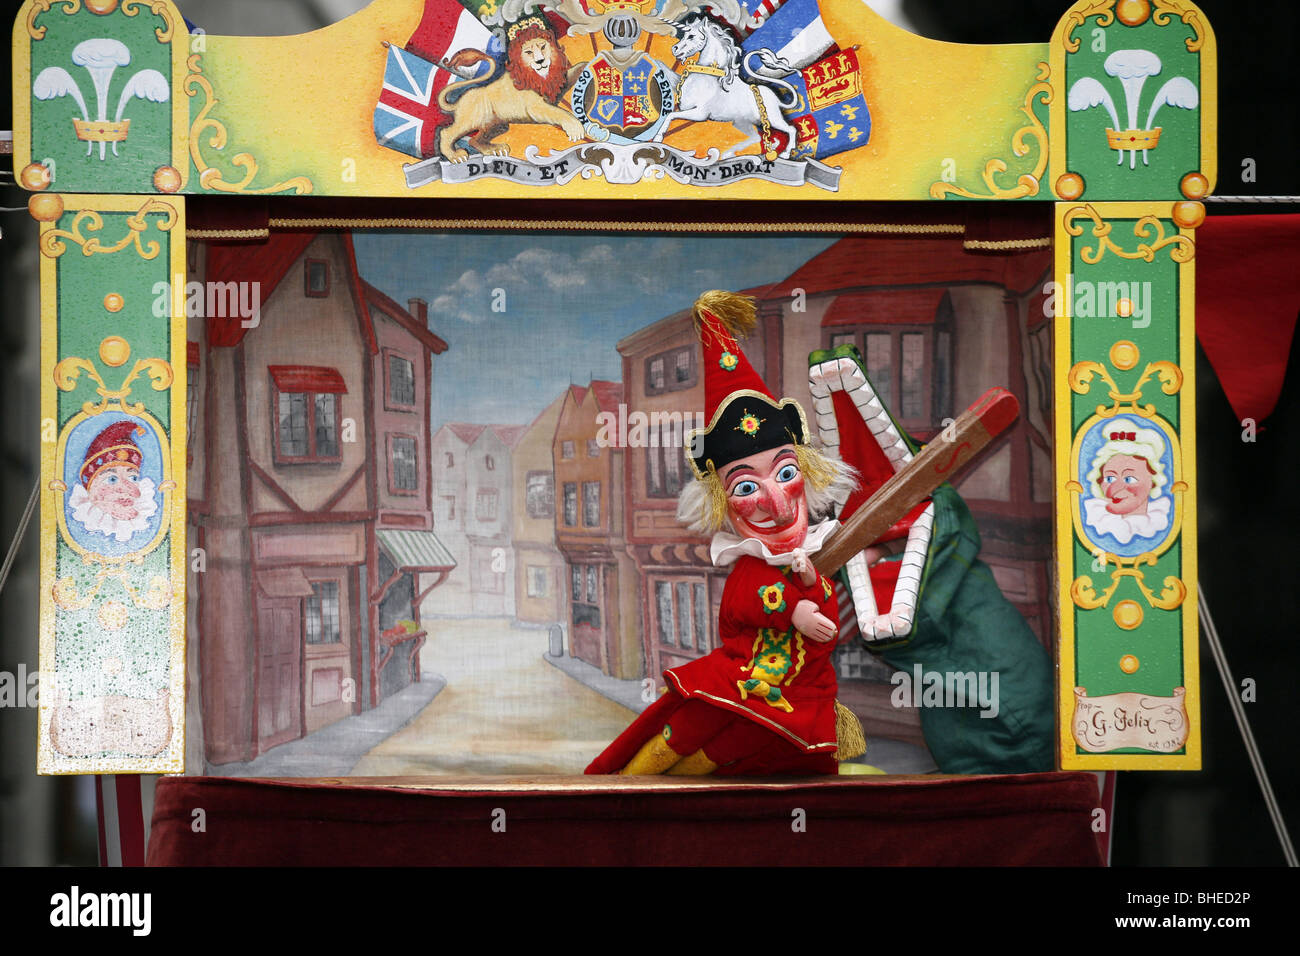 Punch and Judy Show Stock Photo